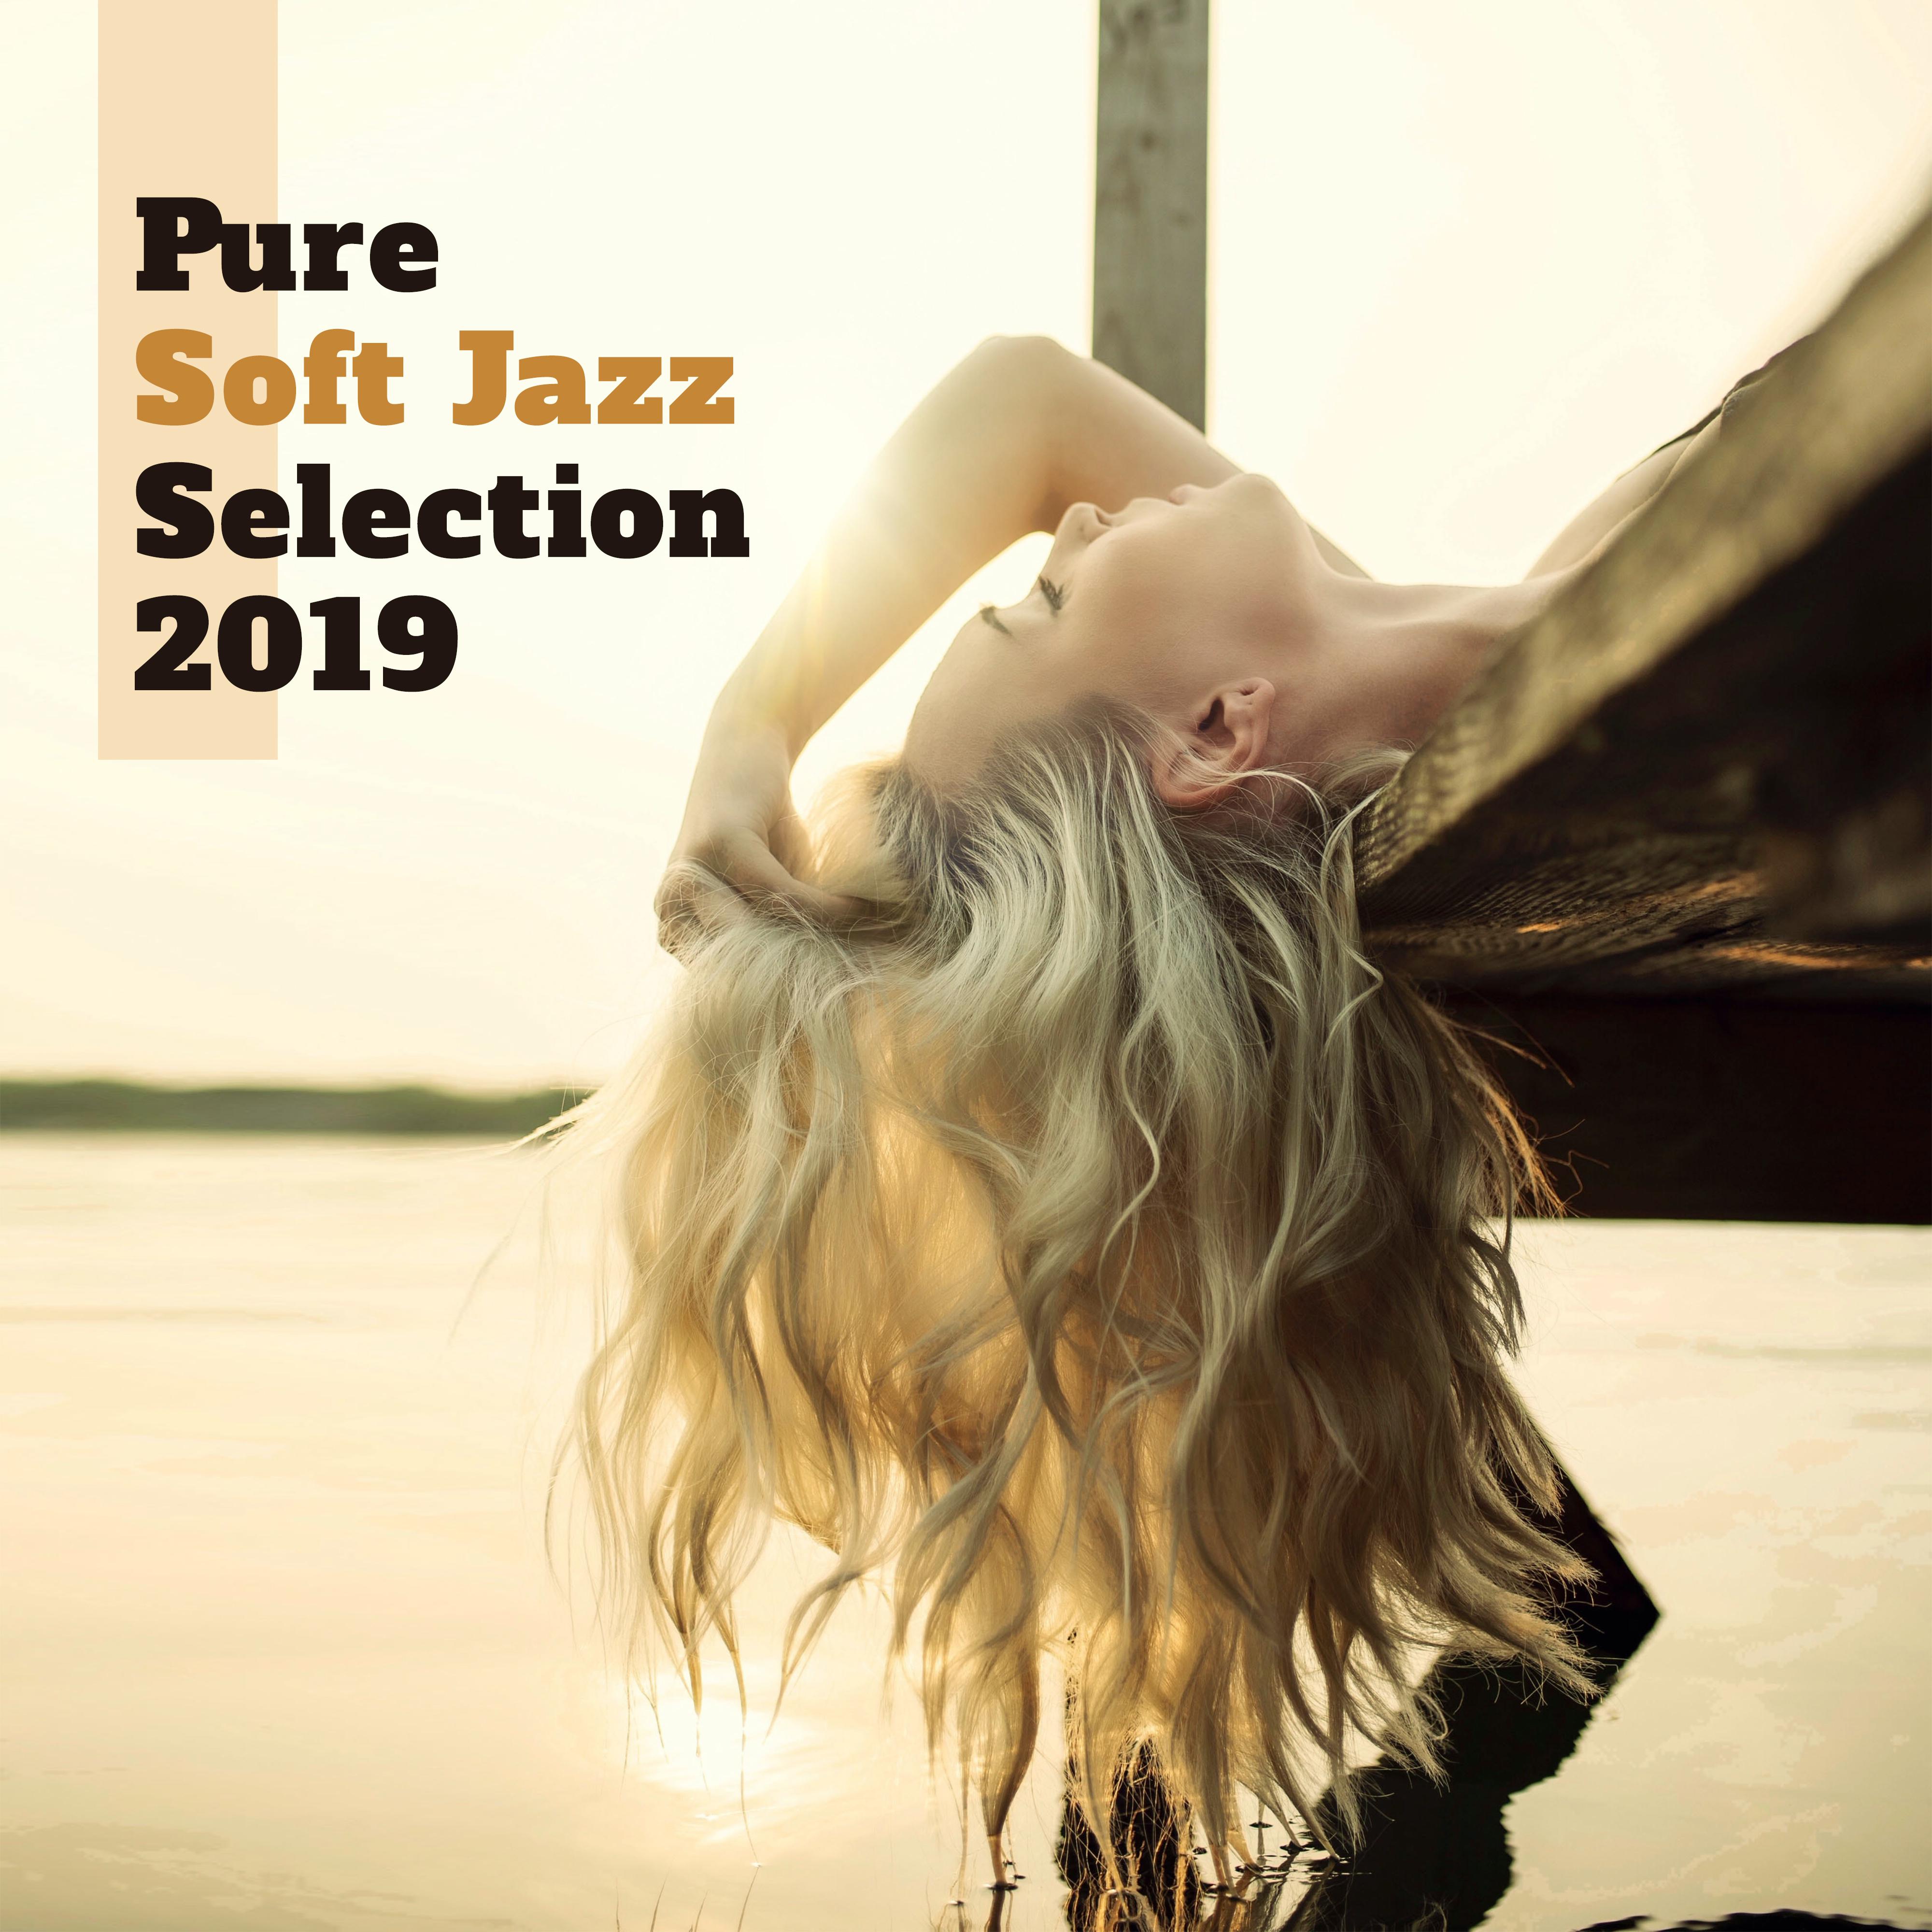 Pure Soft Jazz Selection 2019  Best instrumental Smooth Jazz Music Compilation of Relaxation Songs, Vintage Happy Rhythms to Calming Down  Destress